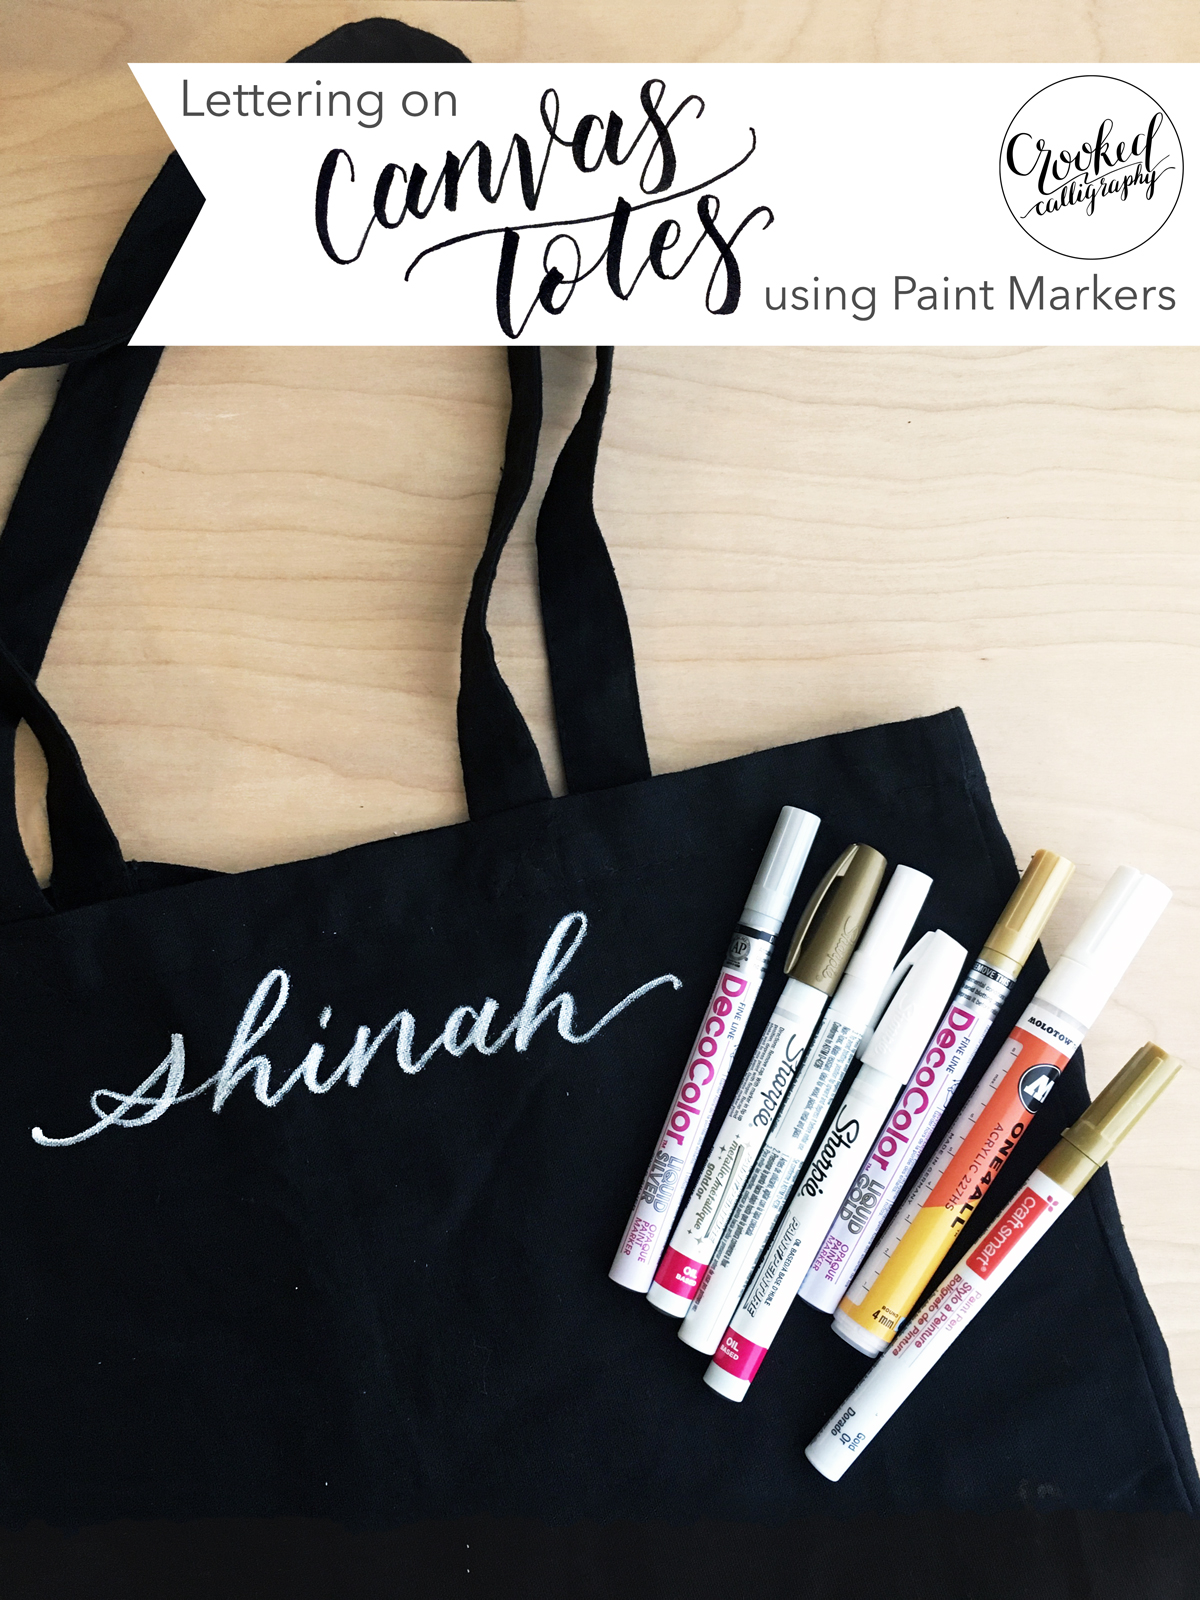 SHINAH REVIEWS: The Best Paint Markers for lettering on canvas totes —  Crooked Calligraphy